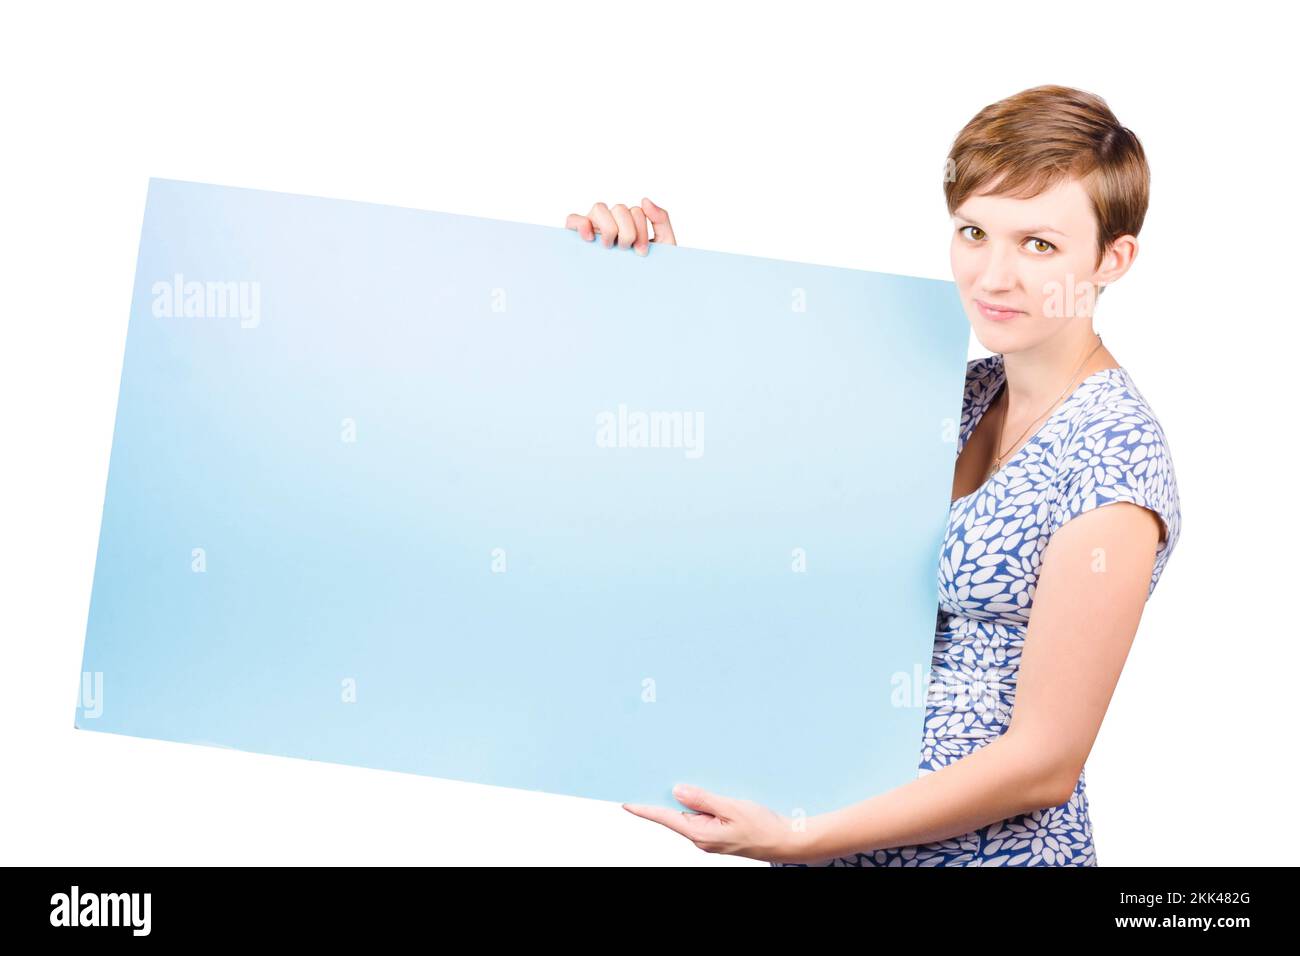 Smiling friendly young woman with short neat hair holding a blank blue rectangular placard to the side with copyspace for your text or advertisement, Stock Photo